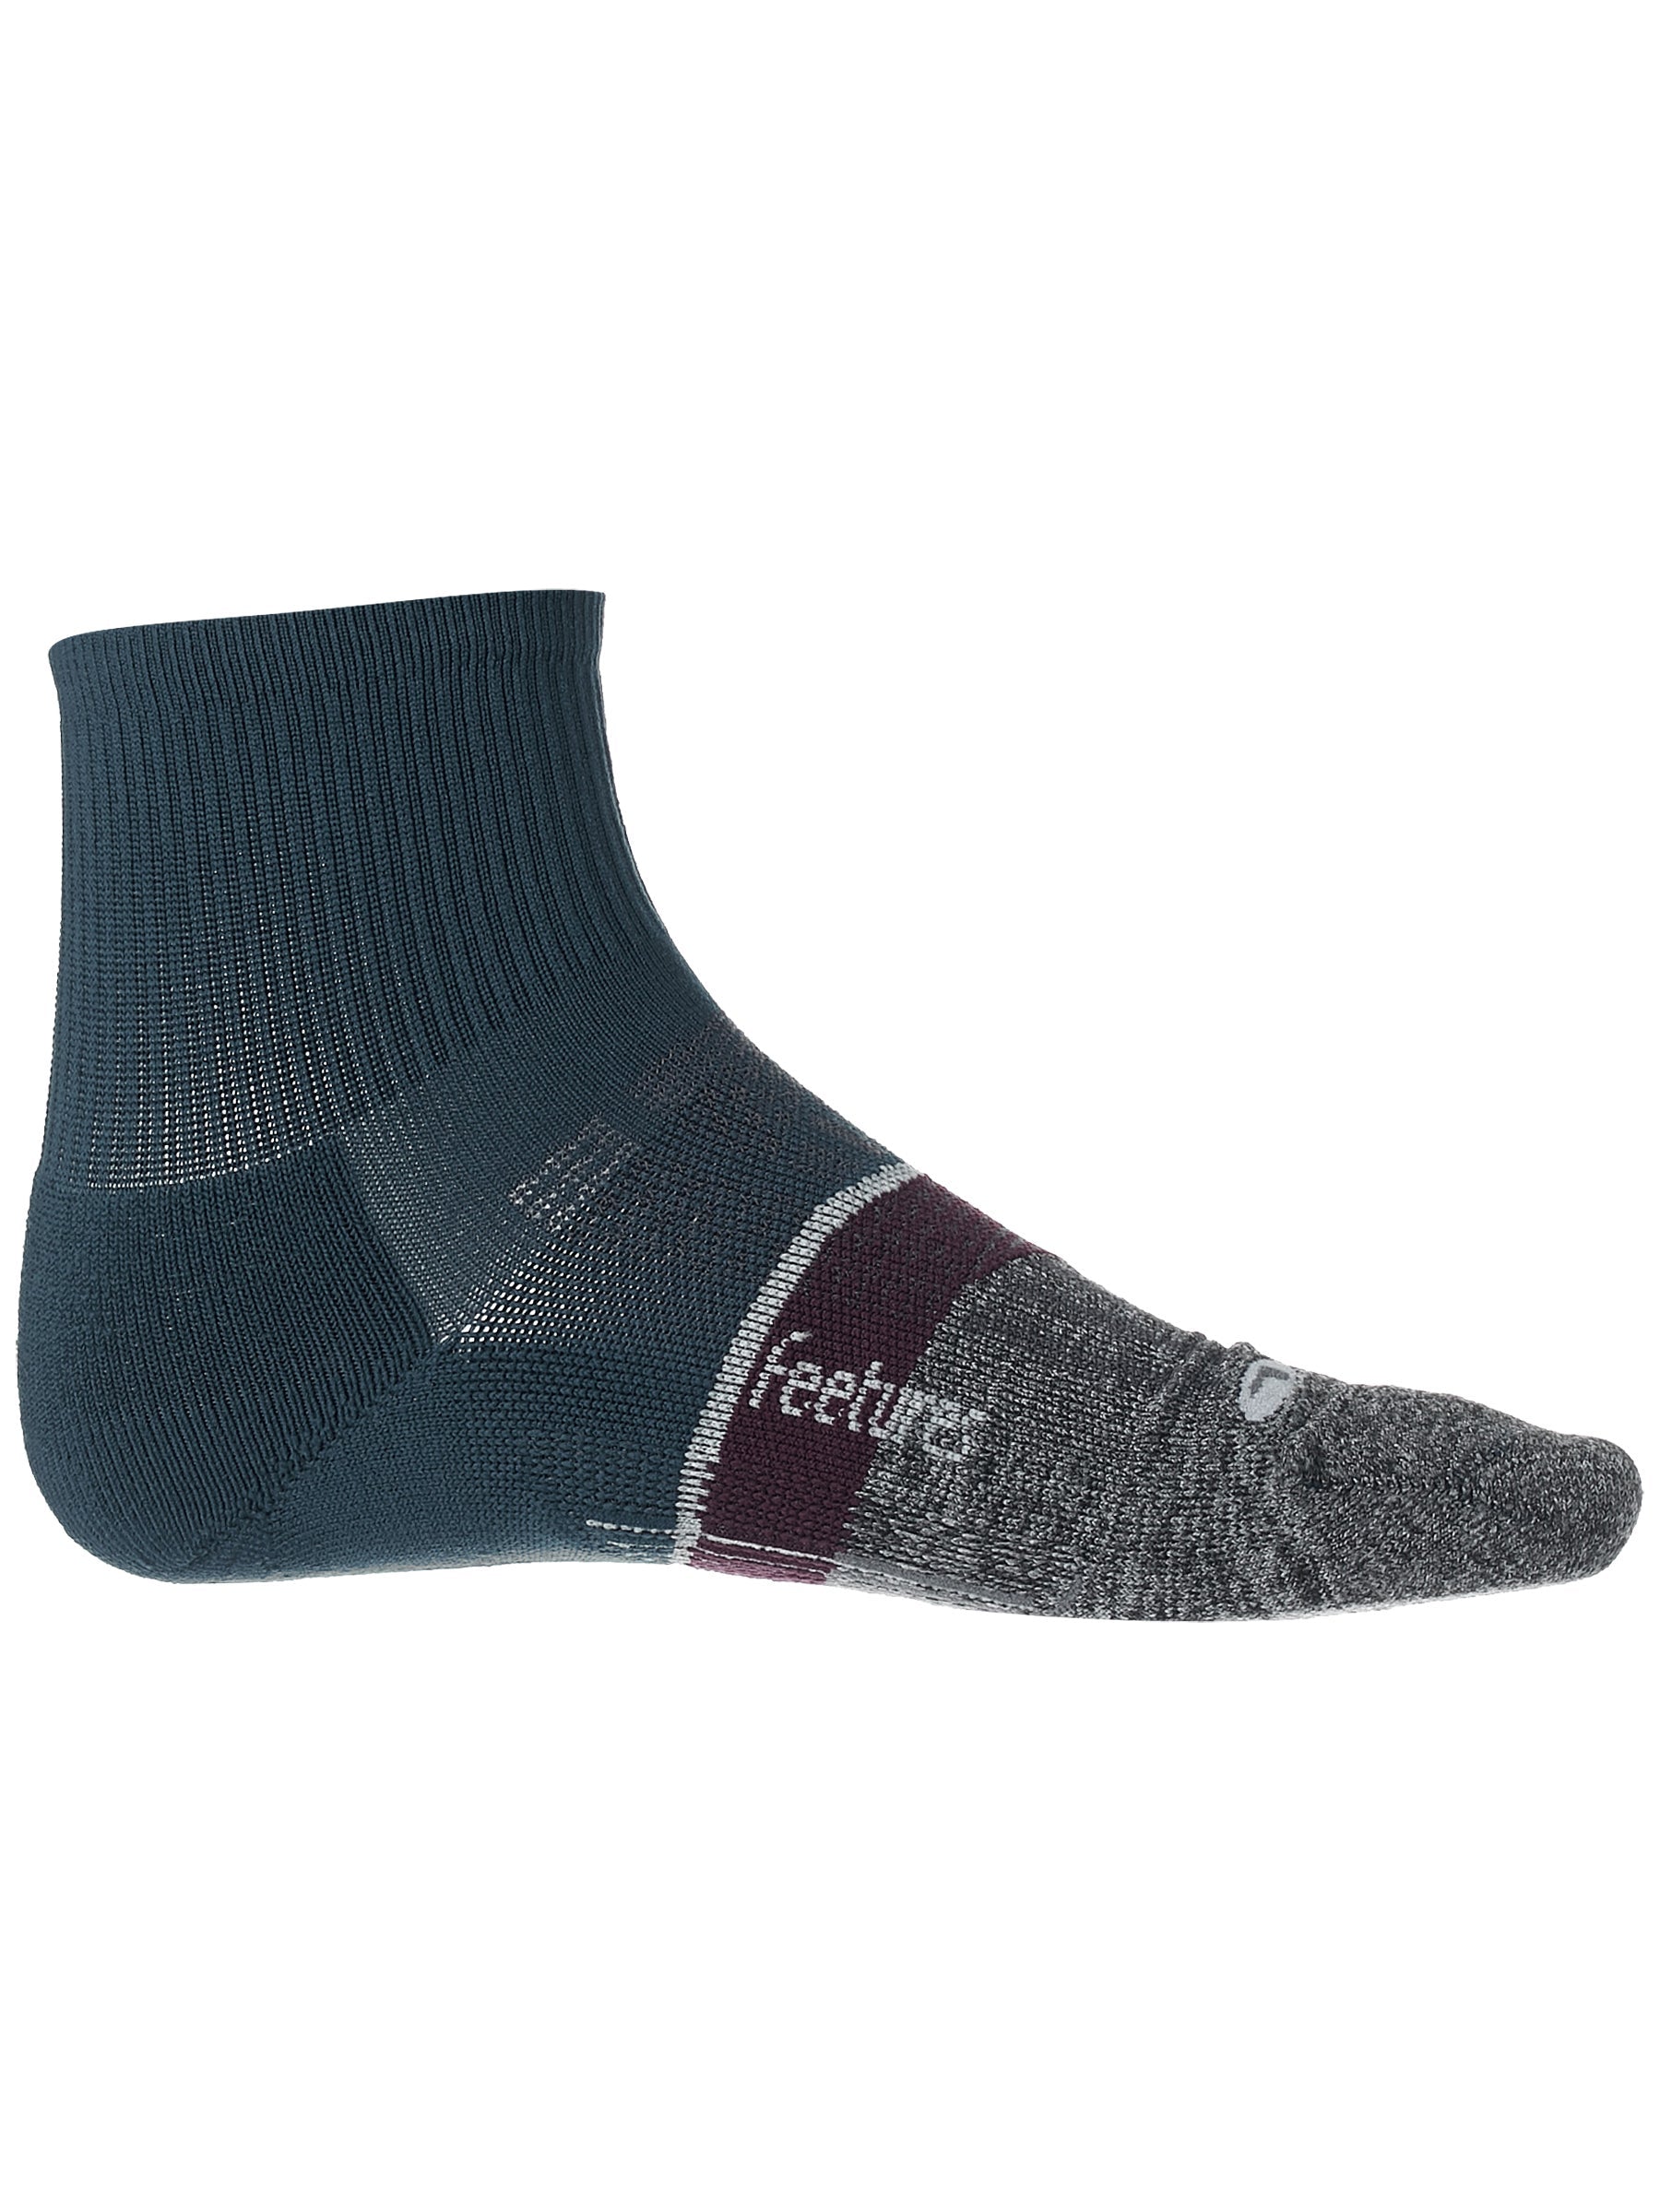 Medial view of the Feetures Light Cushion Quarter sock in the color French blue navy